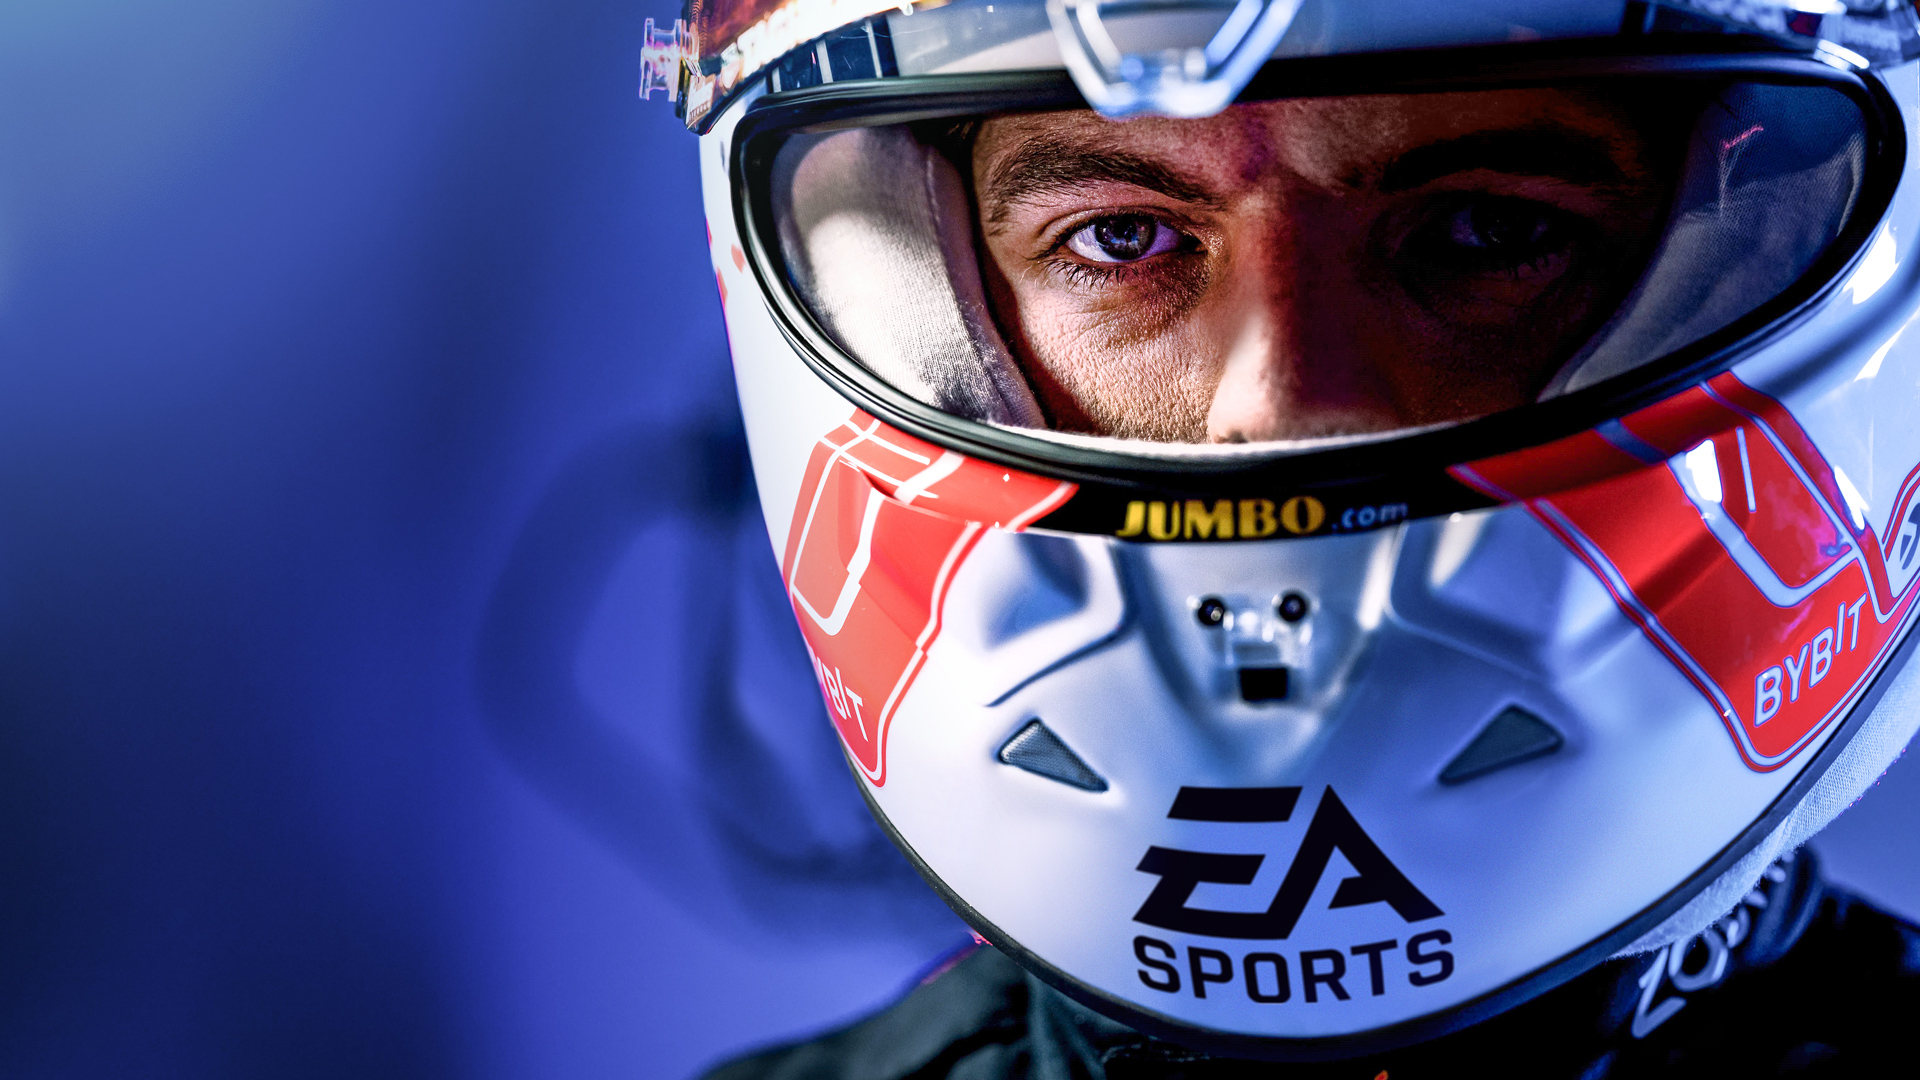 EA SPORTS F1 23 is officially launched, bringing an authentic Formula 1 experience to the gaming world